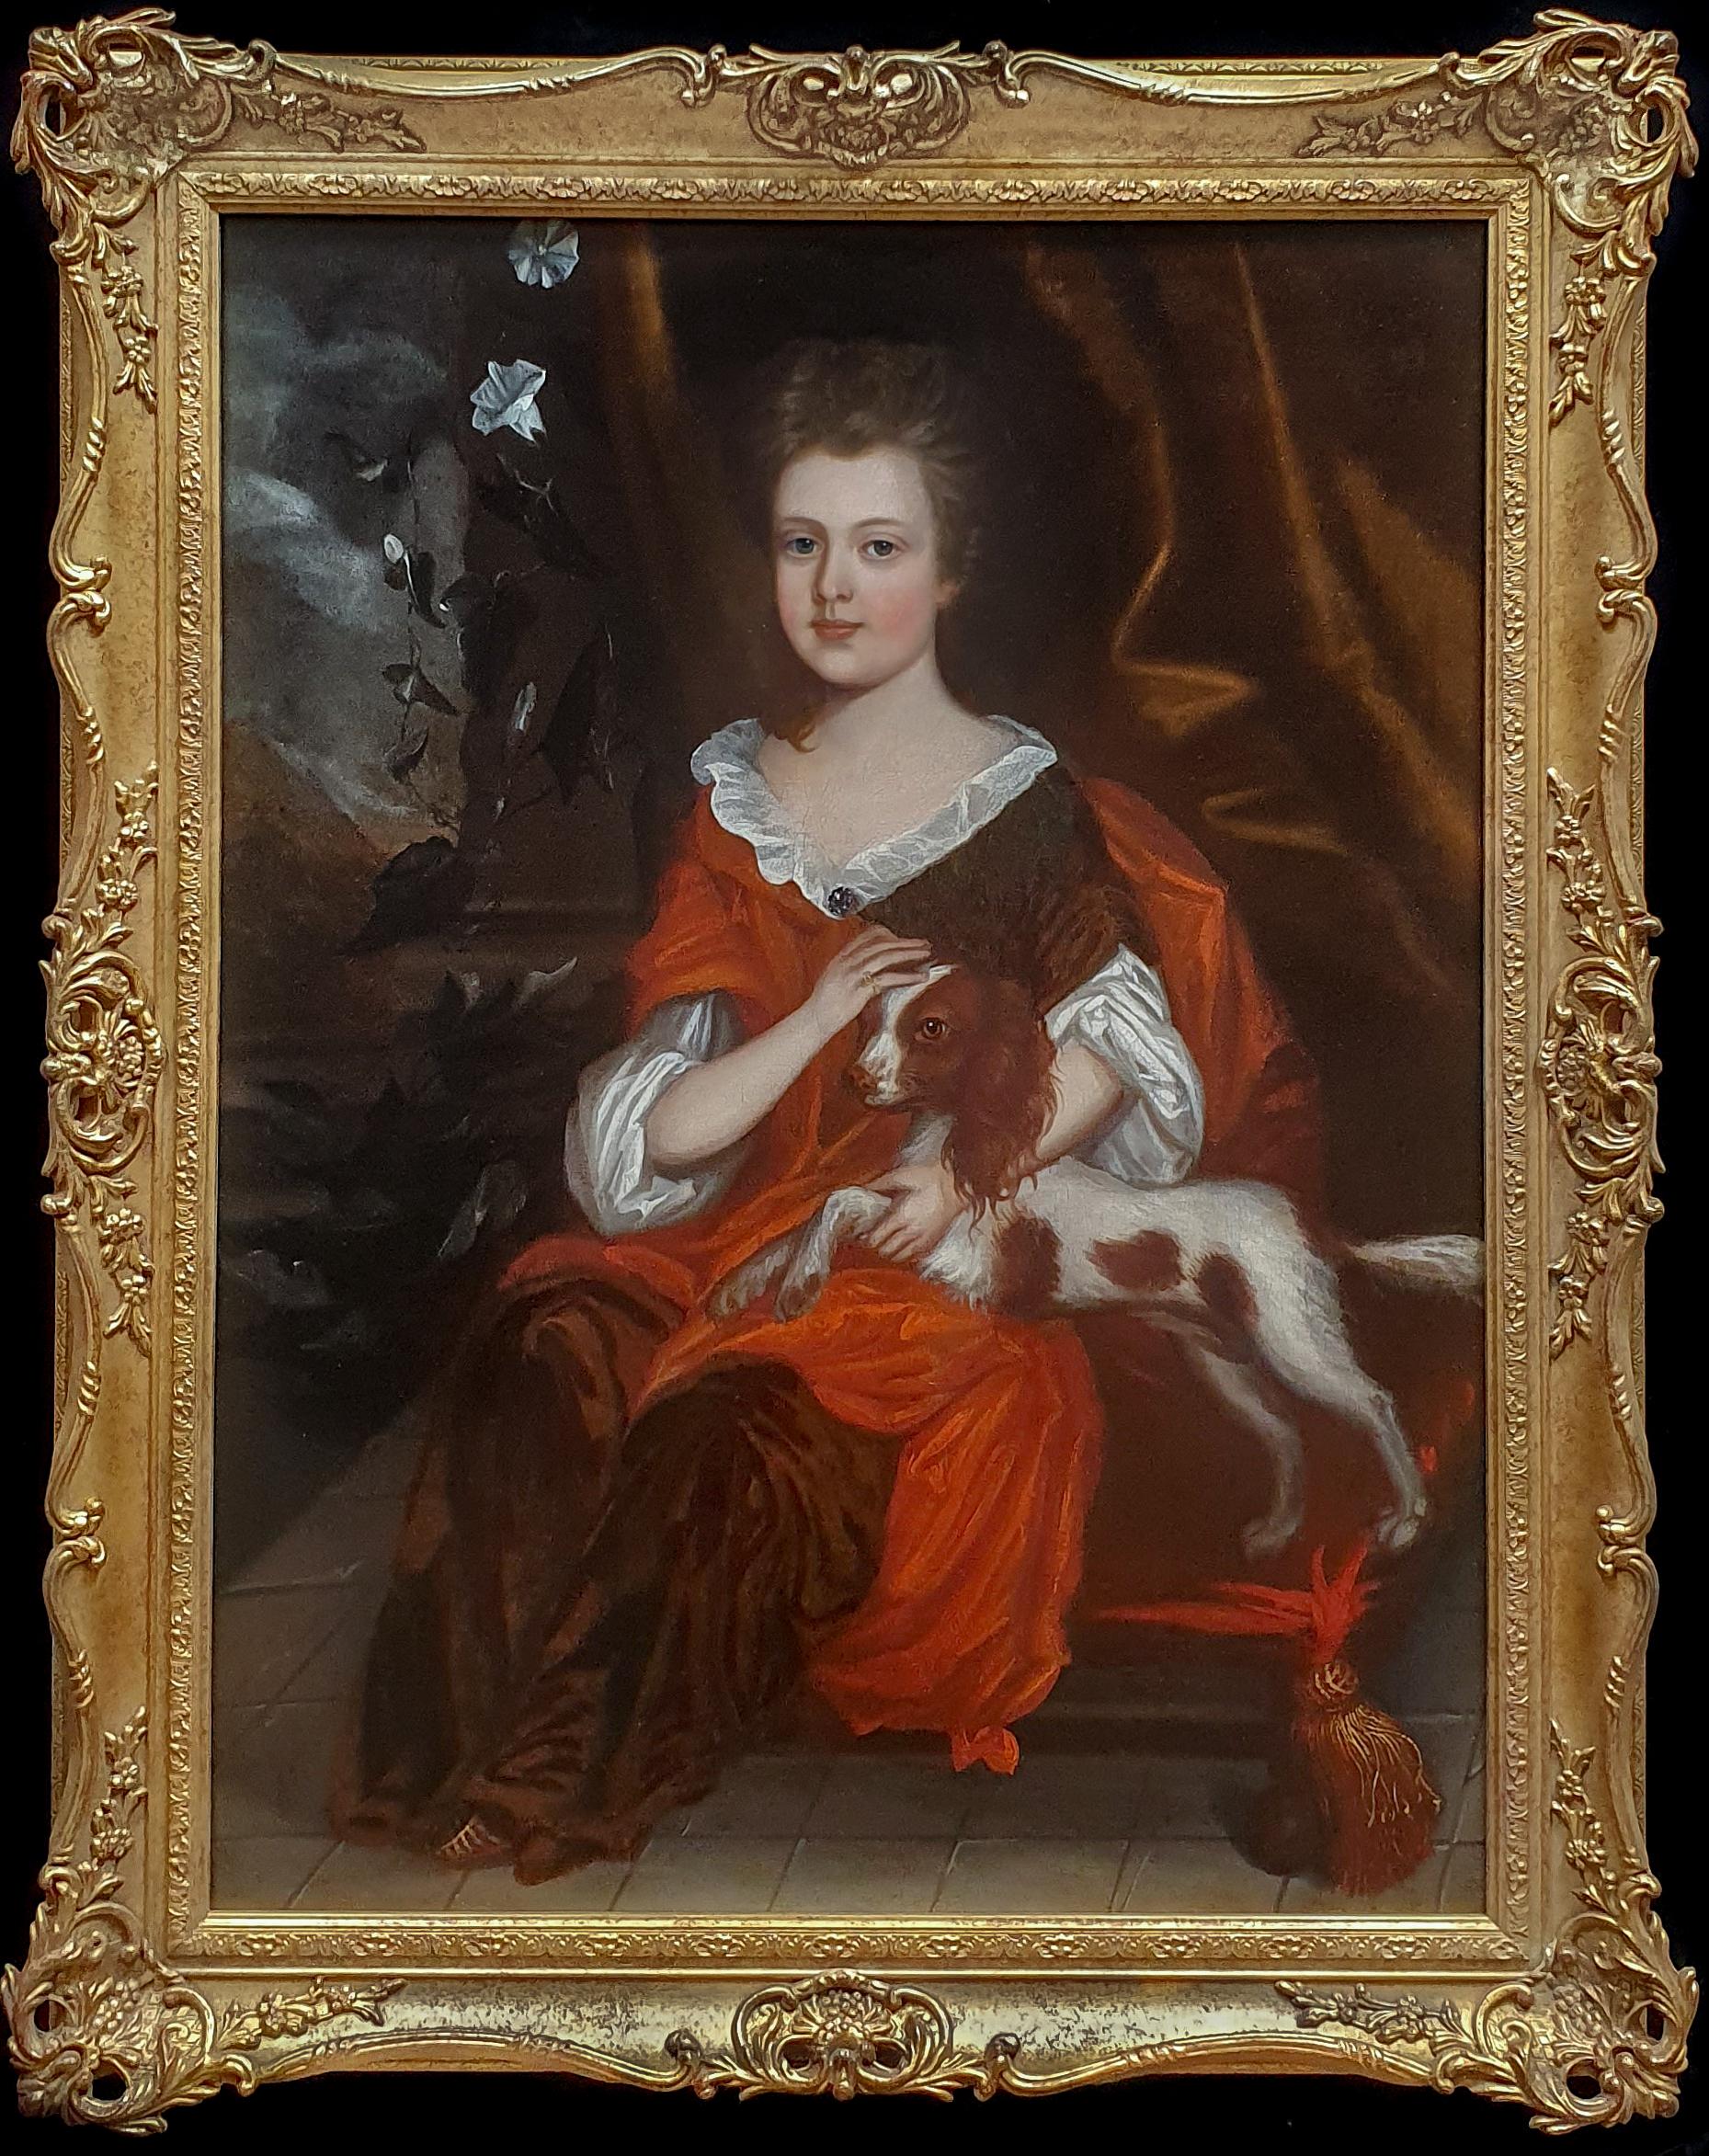 (attributed to) Johannes Verelst Portrait Painting - Portrait of a Girl with Spaniel c.1695 Pet Dog Antique oil painting Anglo-Dutch